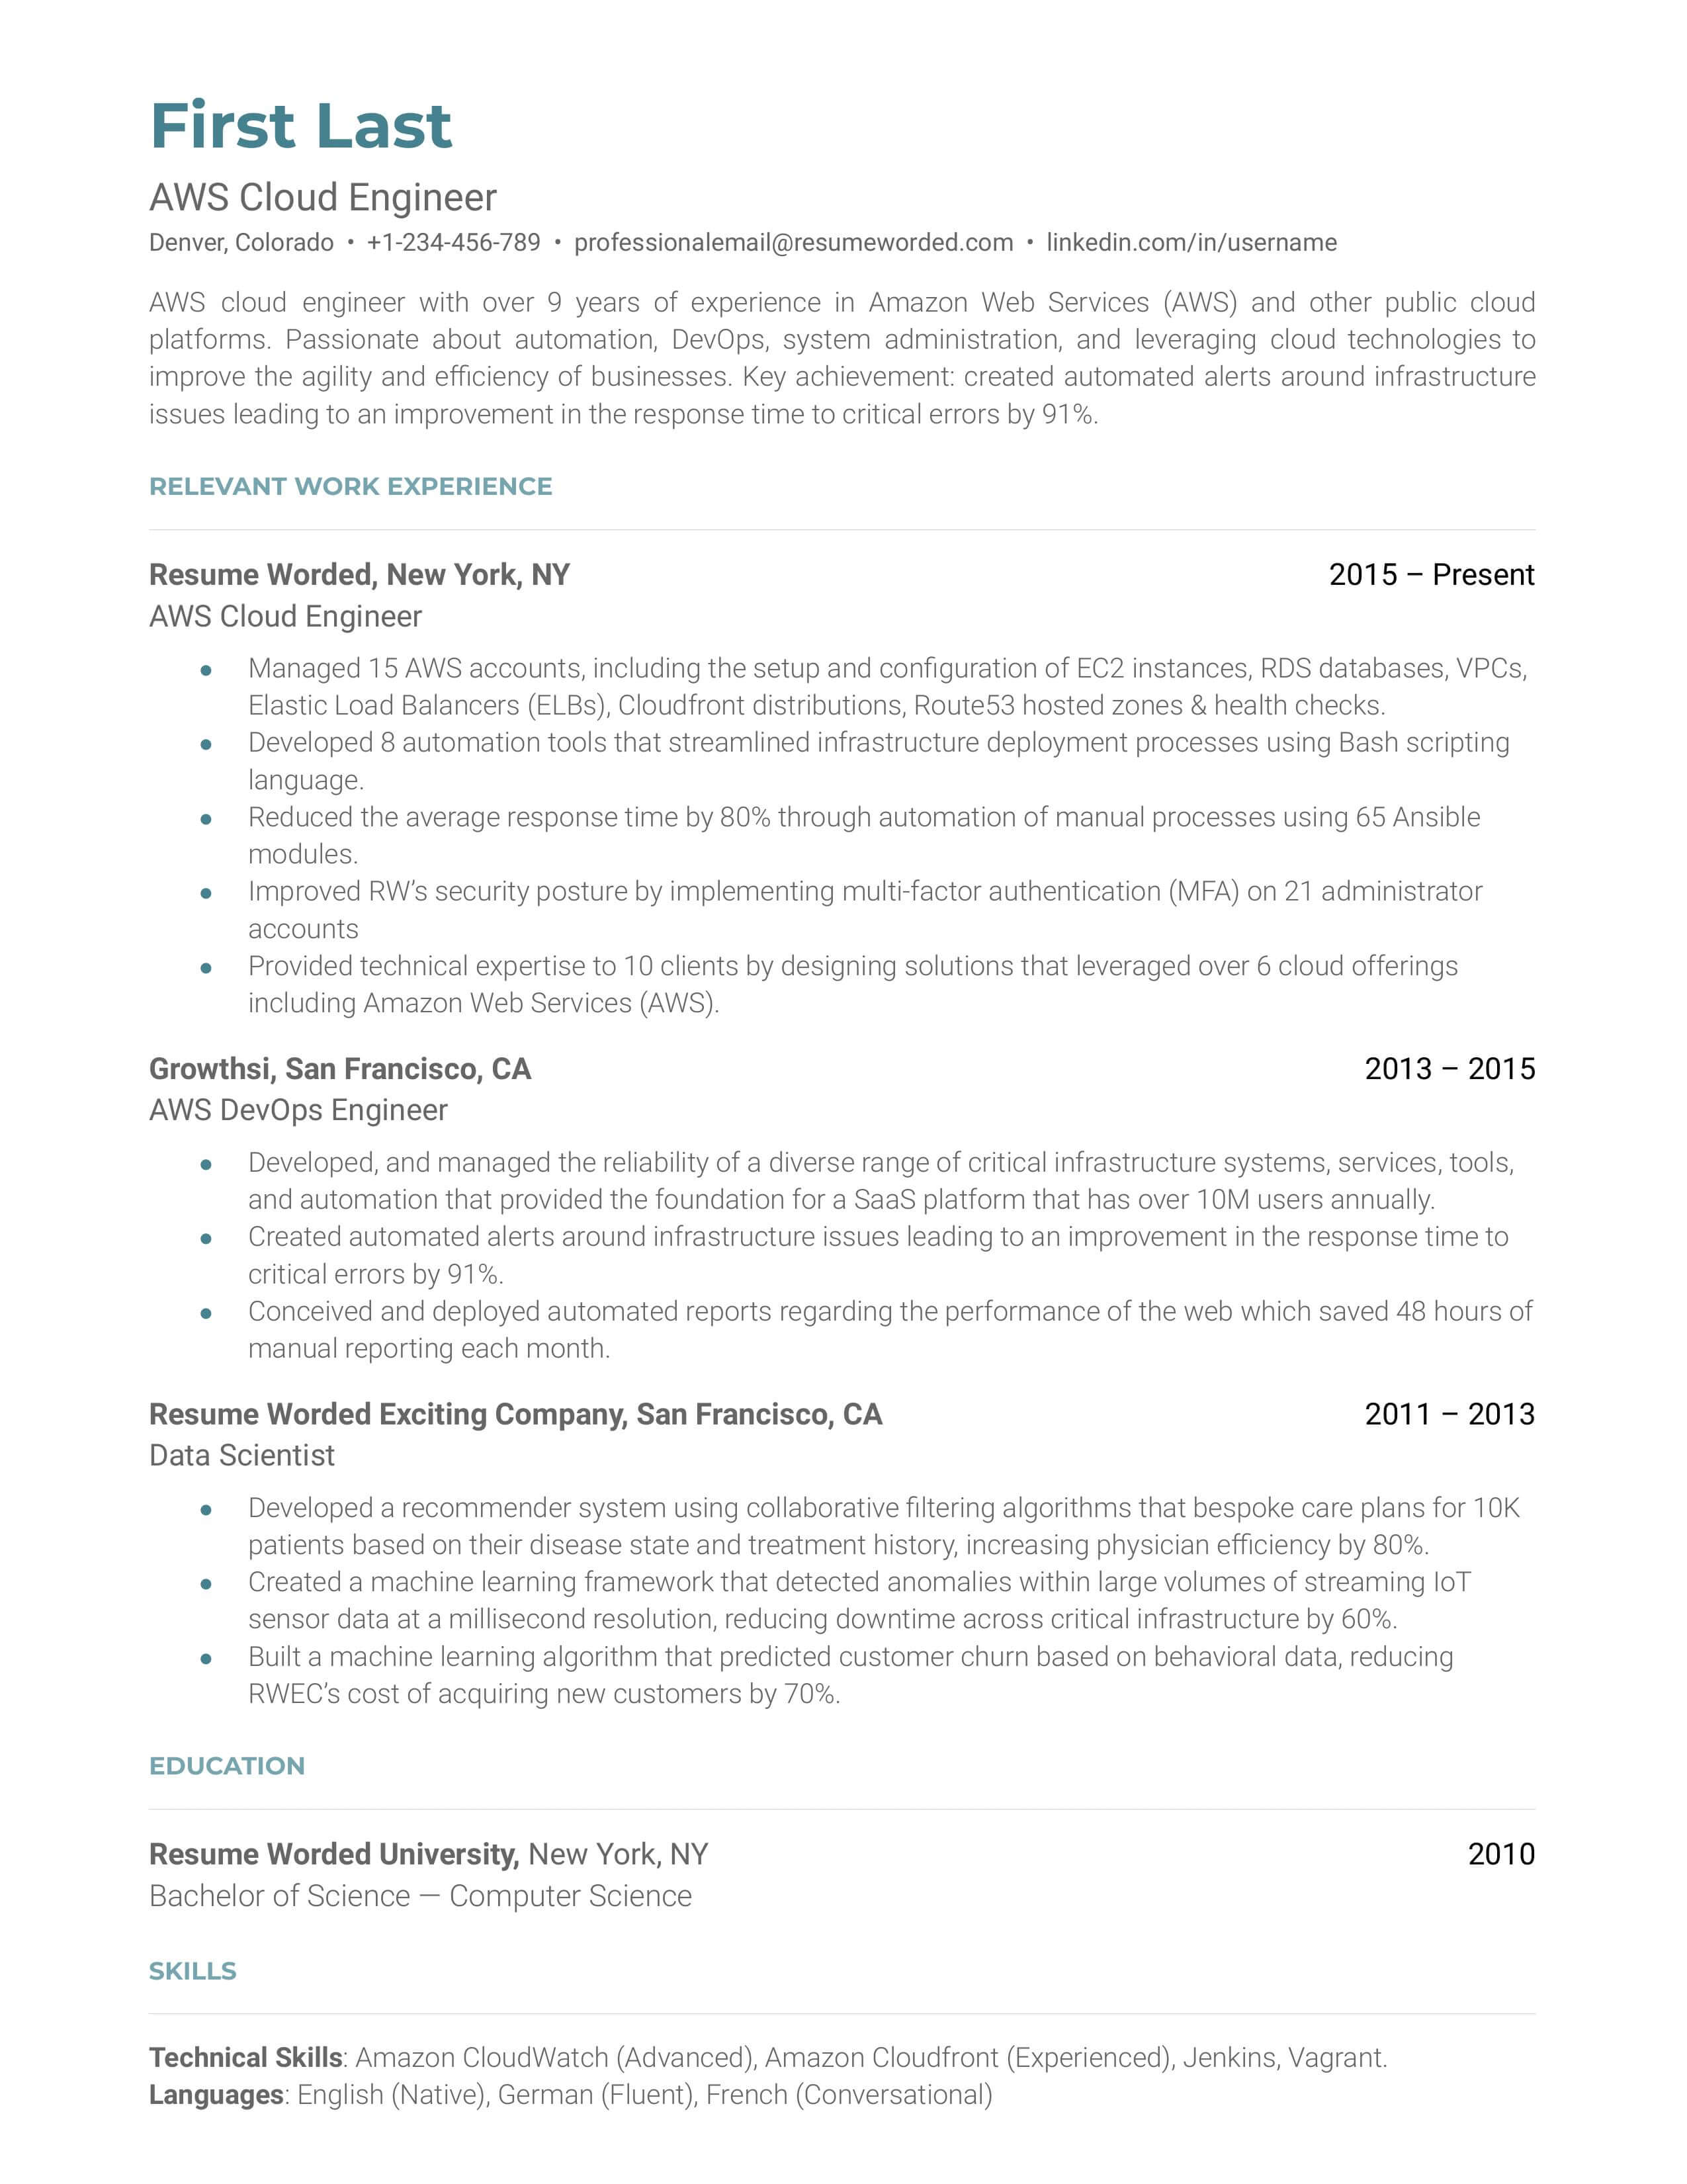 An AWS Cloud Engineer's CV showcasing technical proficiencies and problem-solving abilities.